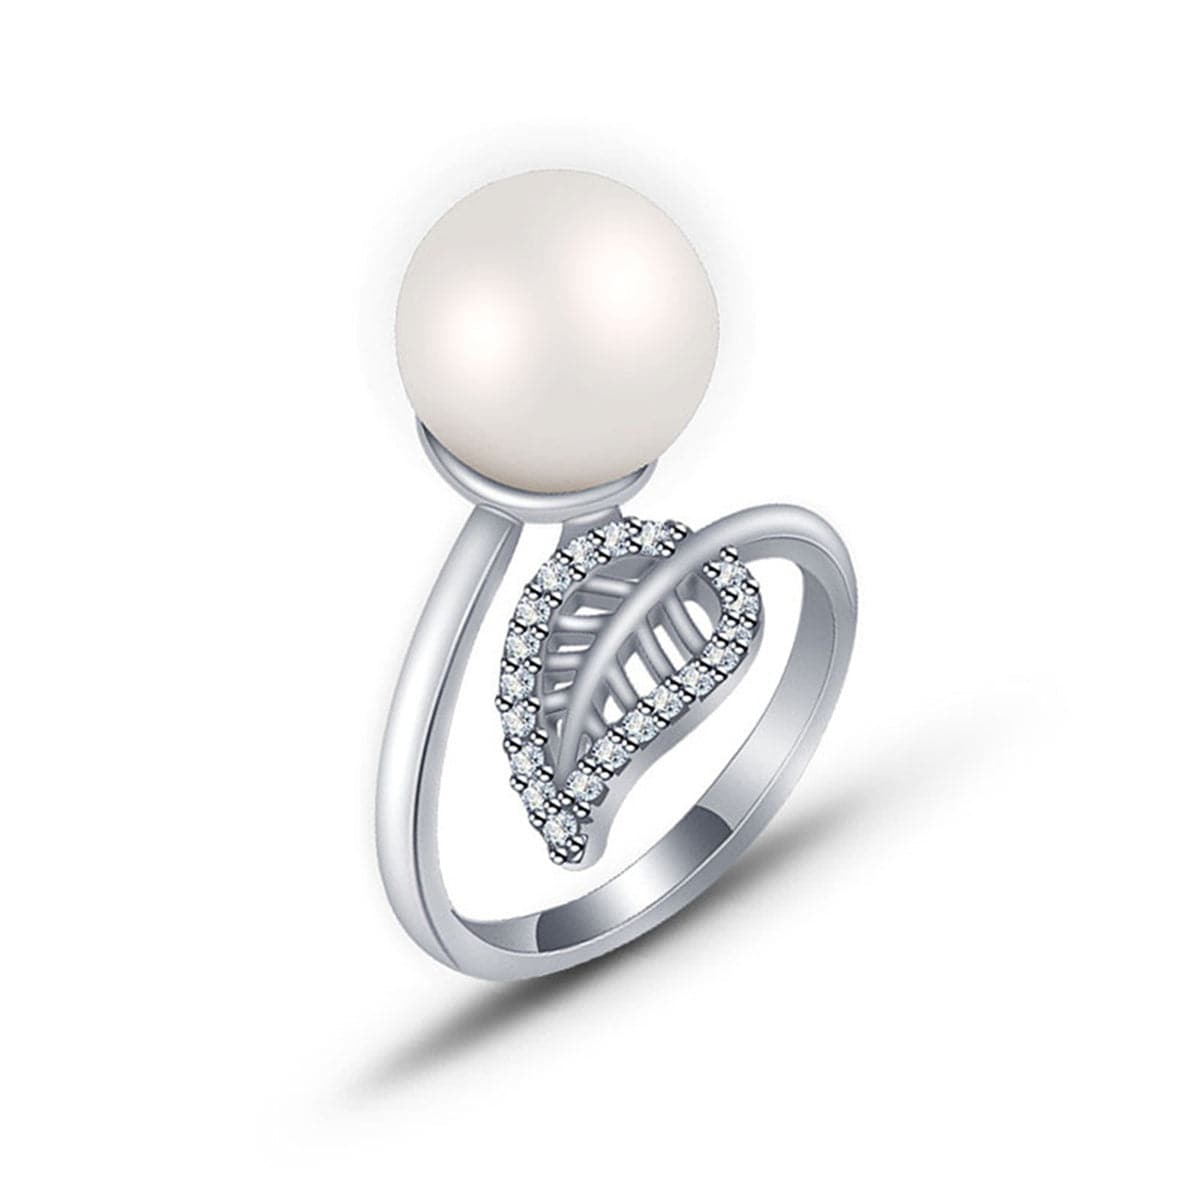 Pearl & Cubic Zirconia Silver-Plated Leaf Bypass Ring